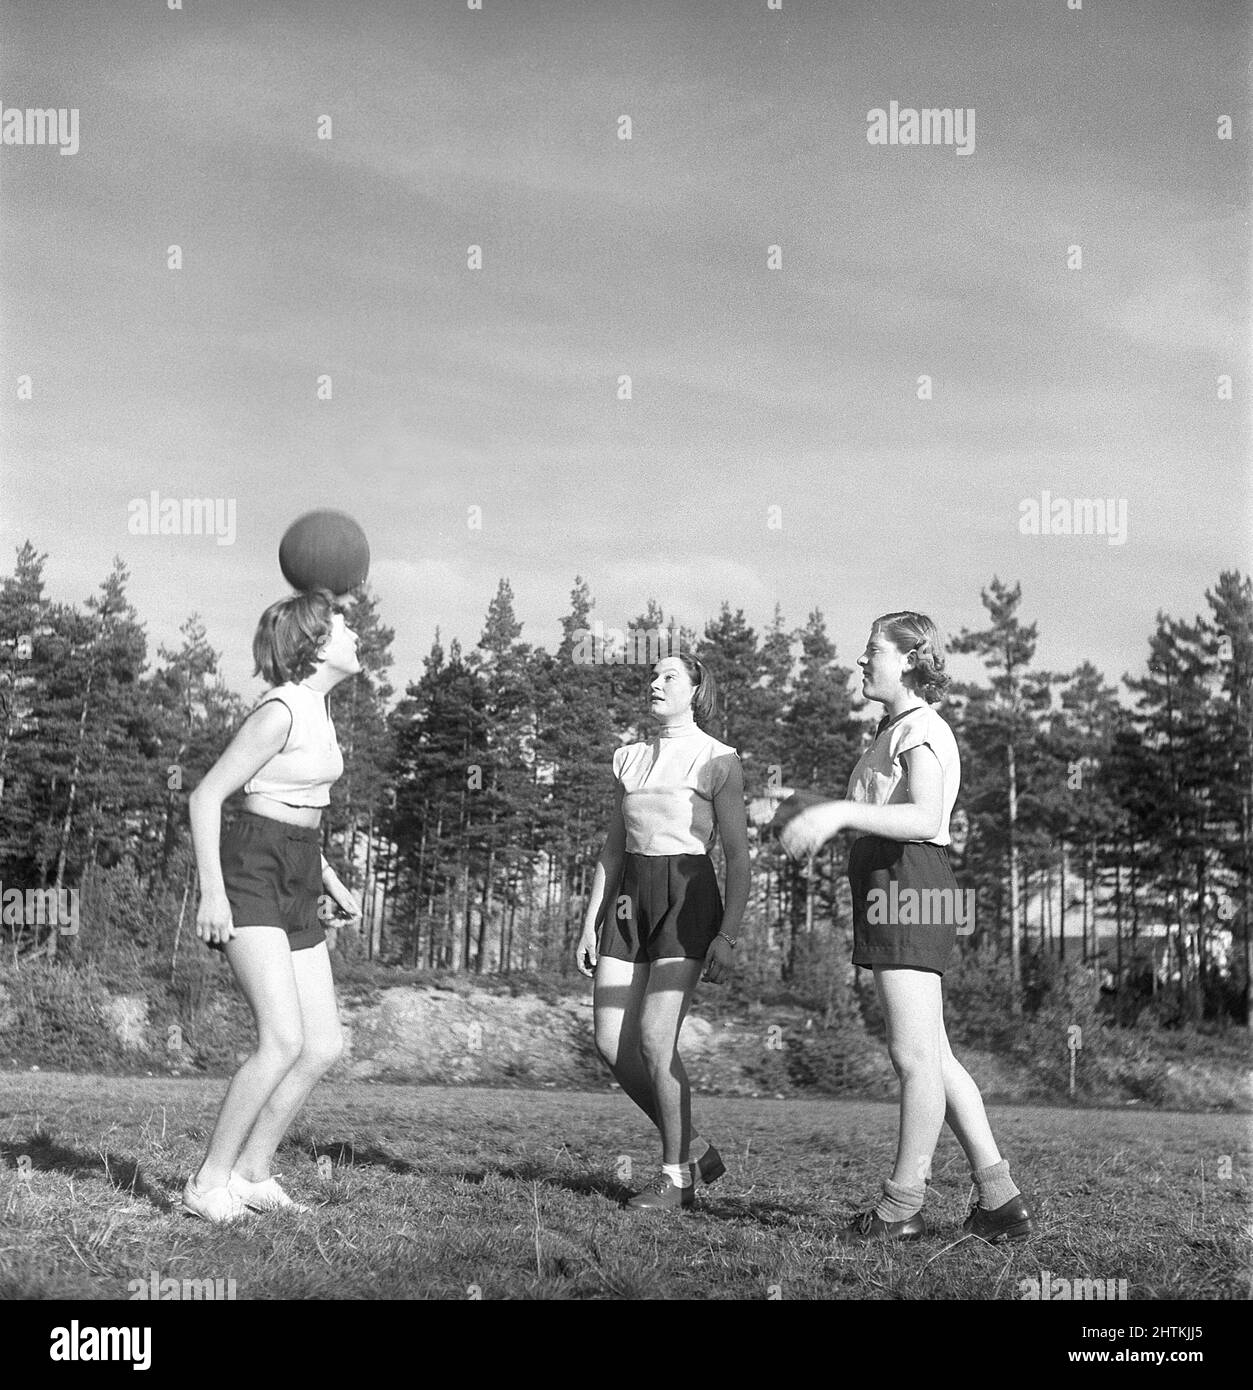 In the 1950s. A women's soccer team during practise. Three players are heading the ball between them.  Sweden 1951 Kristoffersson BE37-11 Stock Photo